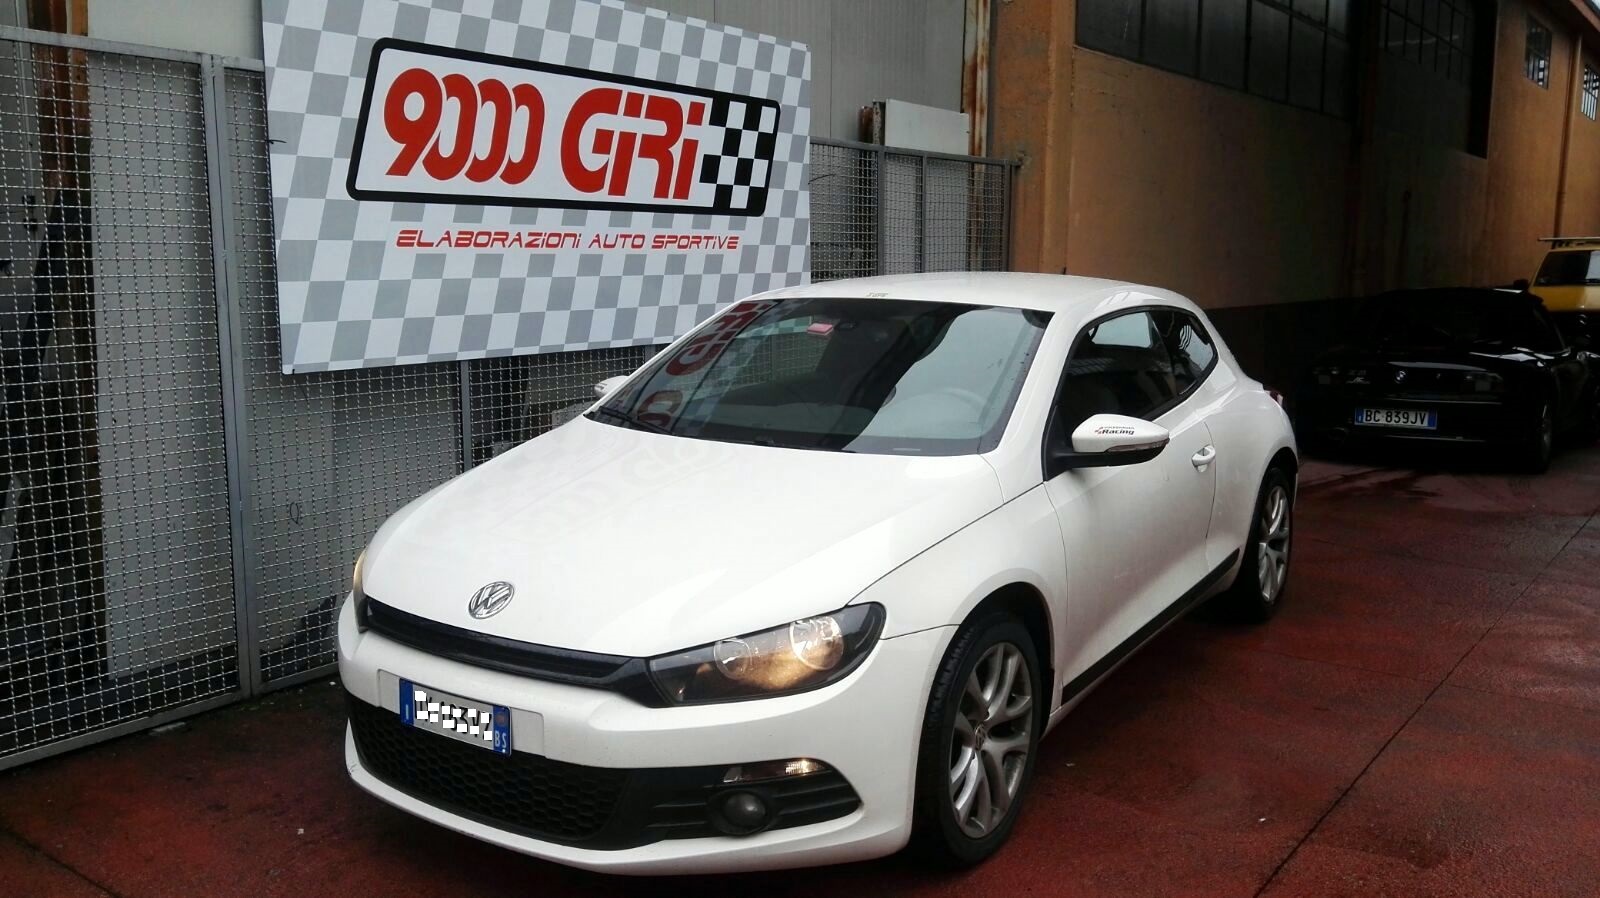 Vw scirocco by 9000 giri